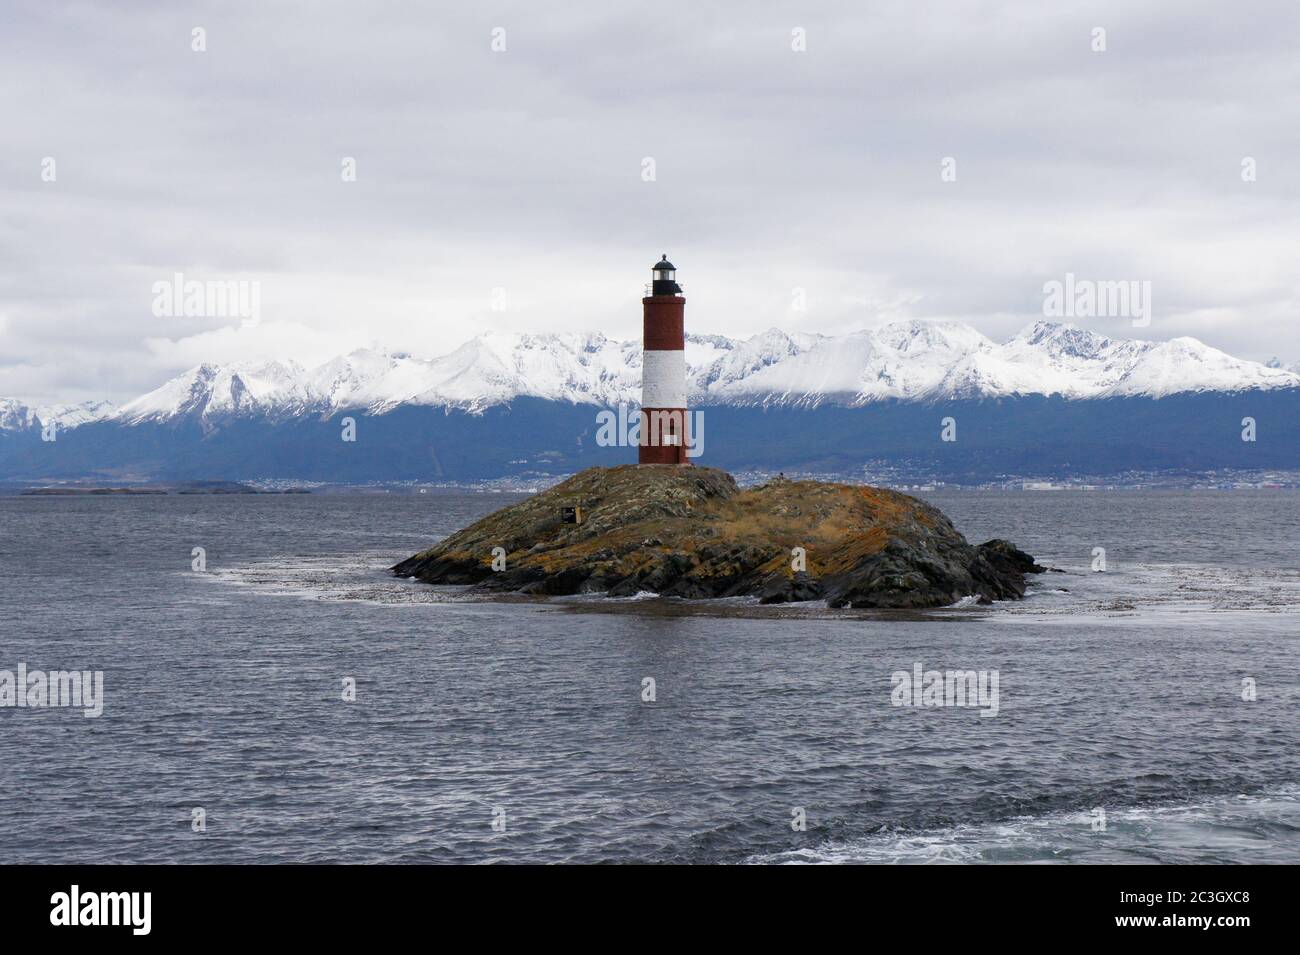 Ushuaia, The Lighthouse at the End of the World, Tierra del Fuego, Argentina, South America Stock Photo